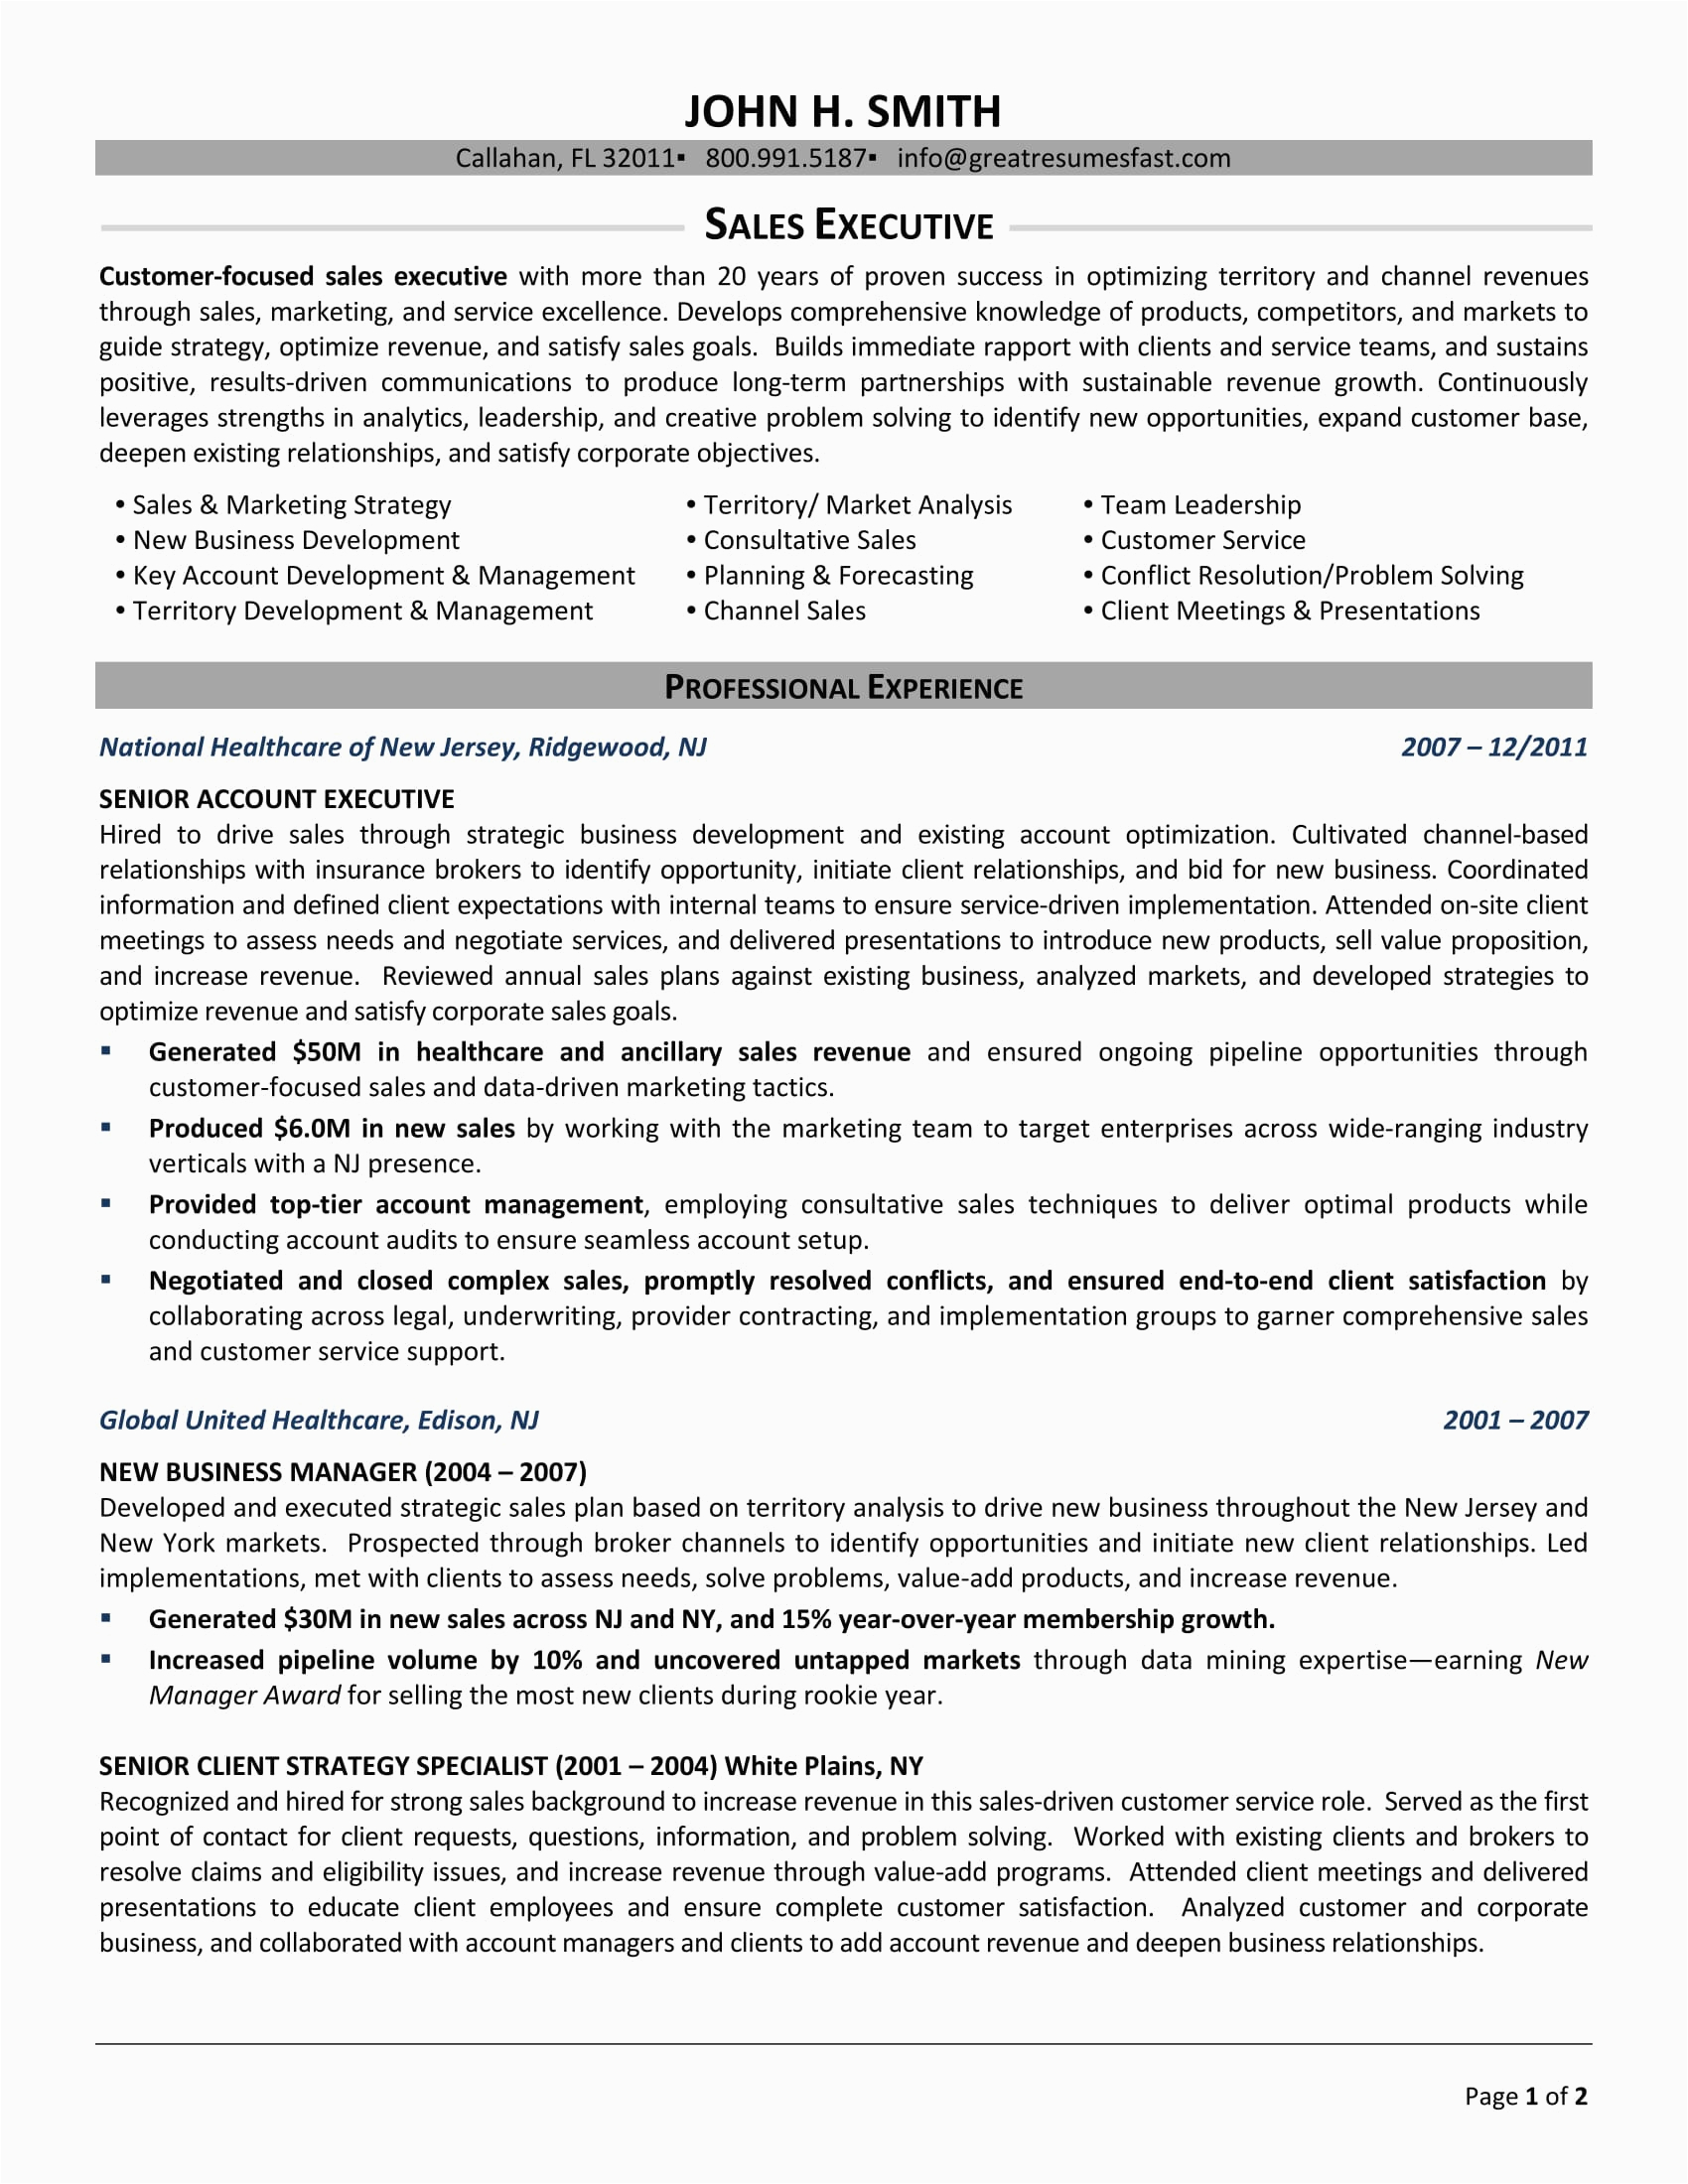 Sample Resume format for Sales Executive 24 Best Sample Executive Resume Templates Wisestep